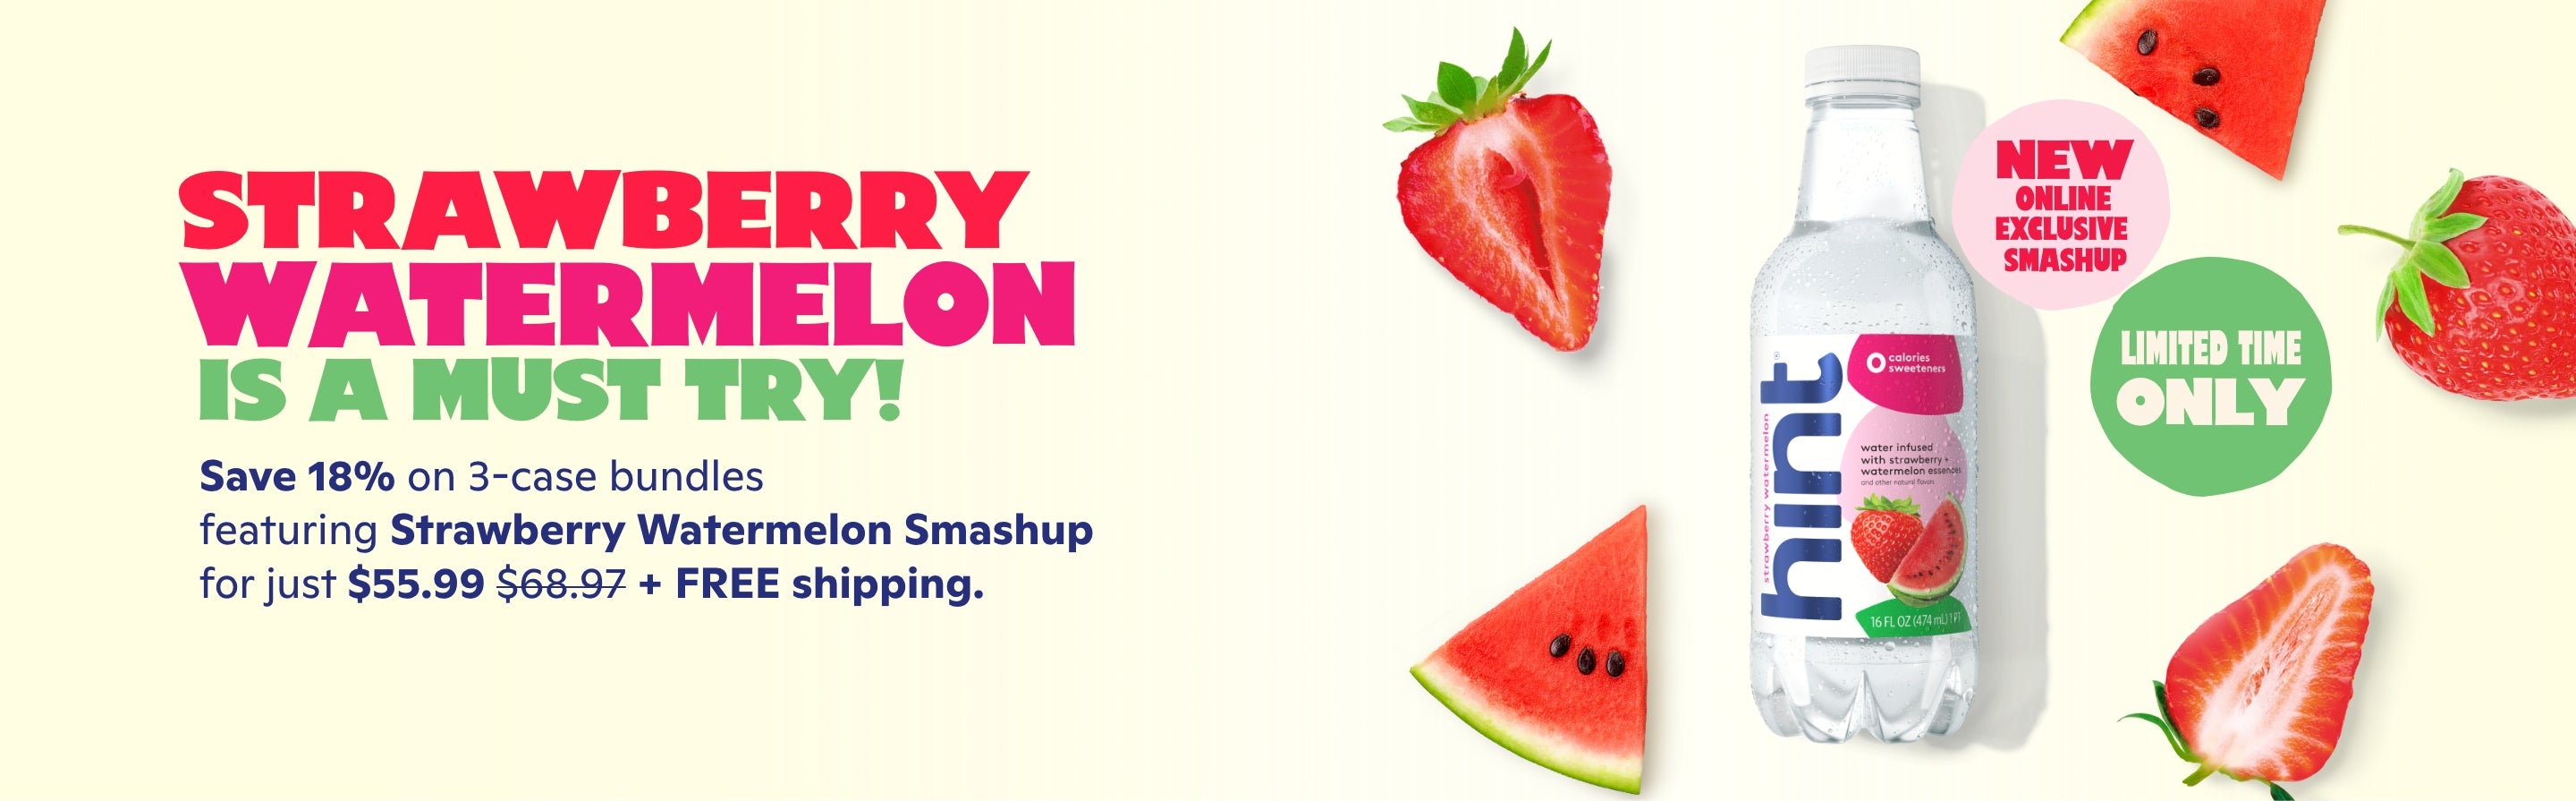 <h1> Strawberry Watermelon is a must try!</h1> <p><br> Save 18% on 3 cases bundles featuring Strawberry Watermelon! <br> Get 3 case bundles for $55.99 + FREE shipping </p>